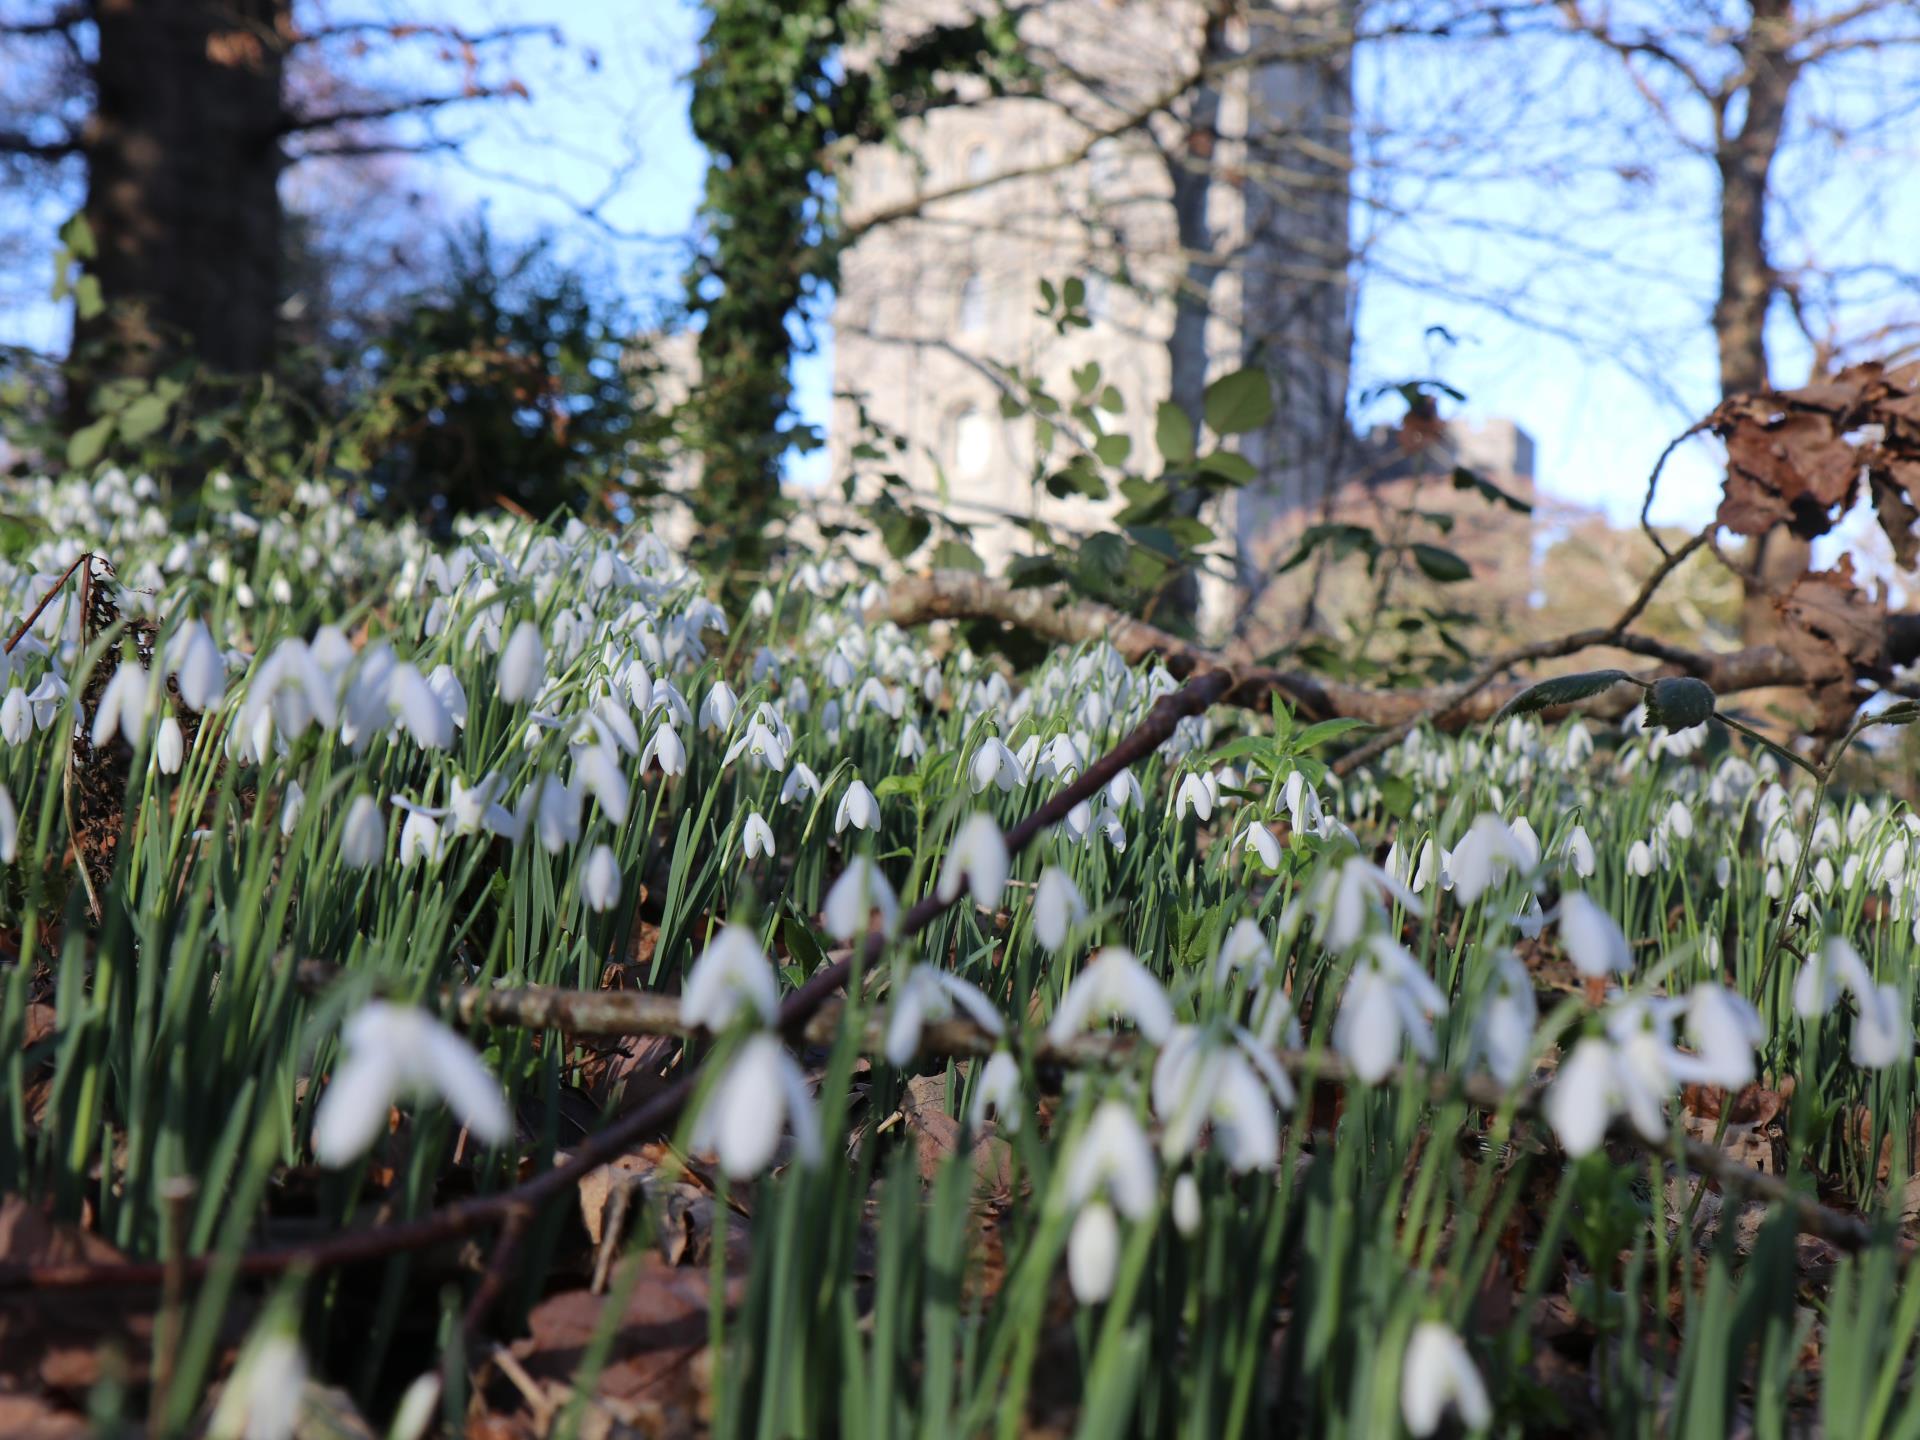 Snowdrops at Penrhyn Castle in the winter